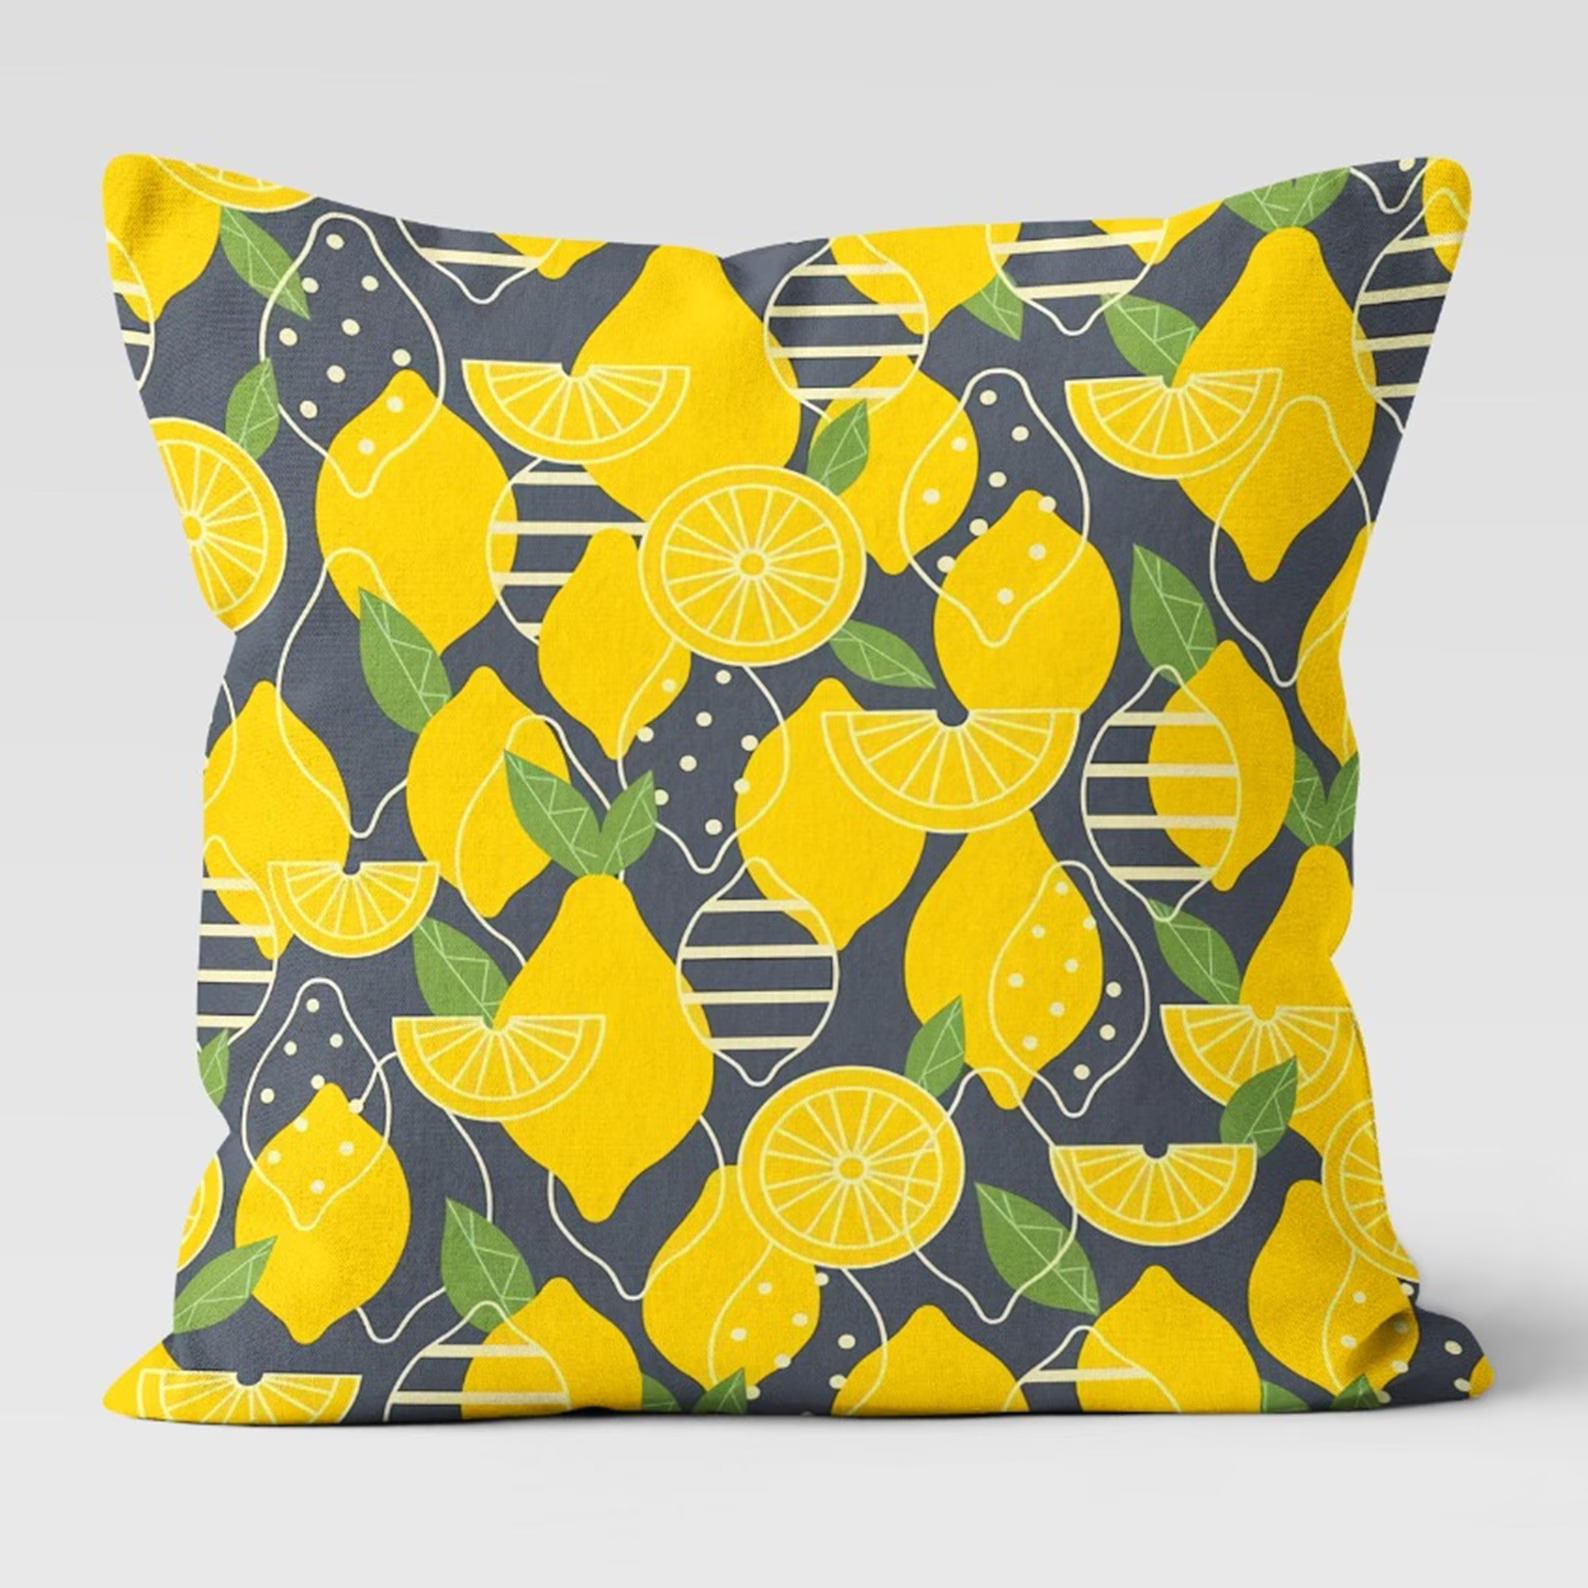 15 Delightful Floral Summer Pillow Patterns for a Blooming Décor